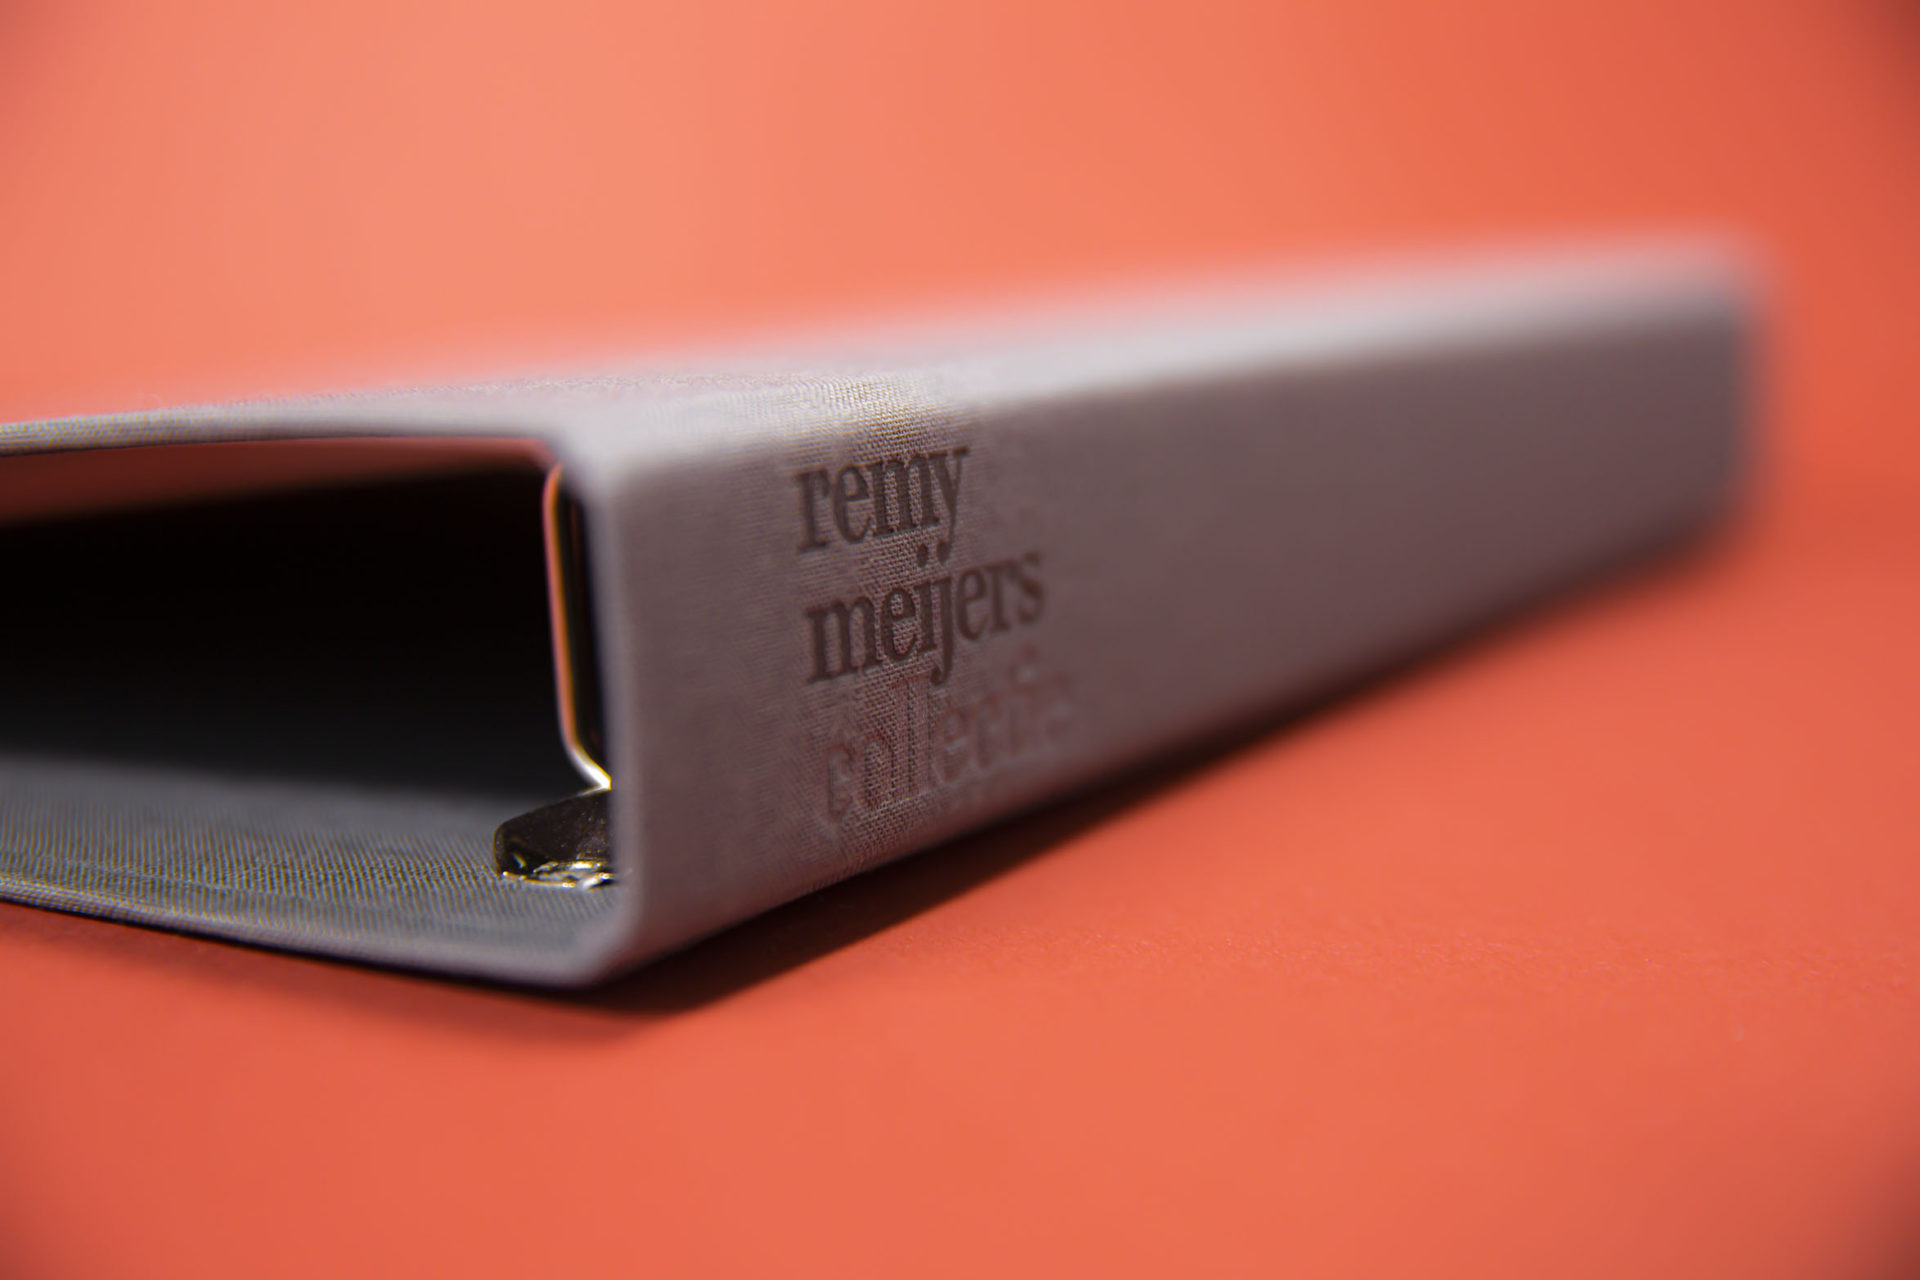 Ringband Remy Meijers